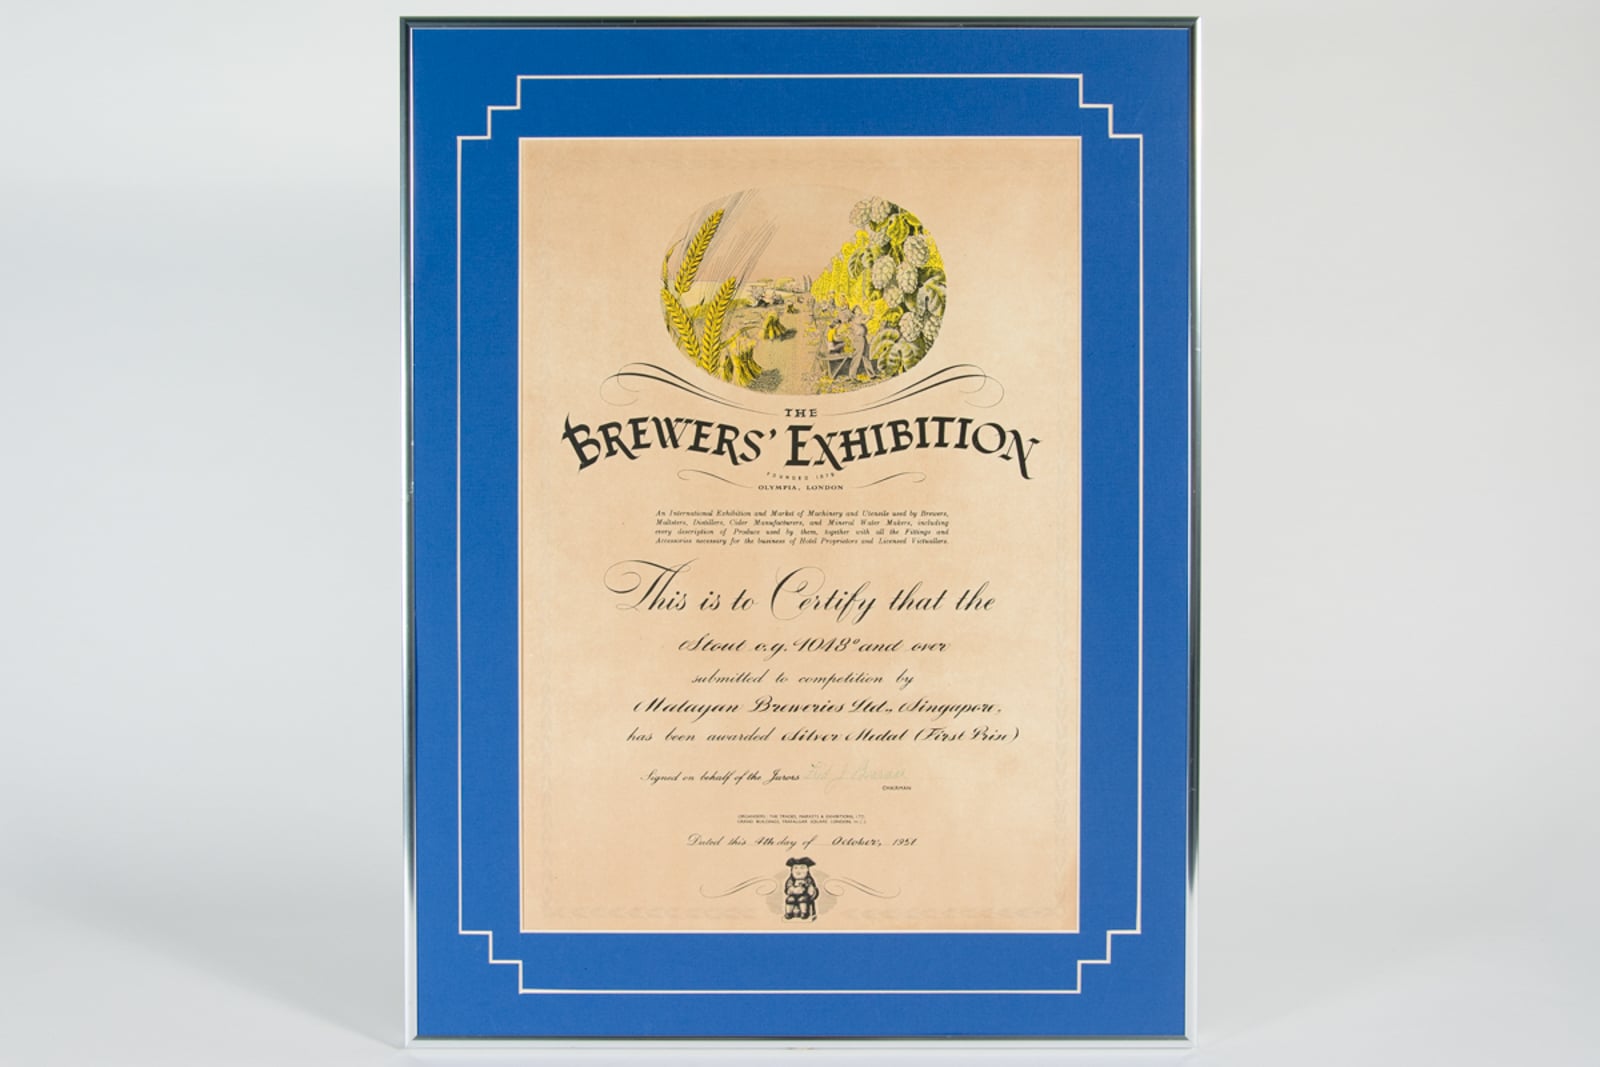 Stout og 1048° & over of Malayan Brewery, Silver Medal (First Prize), The Brewers' Exhibition Certificate 1957